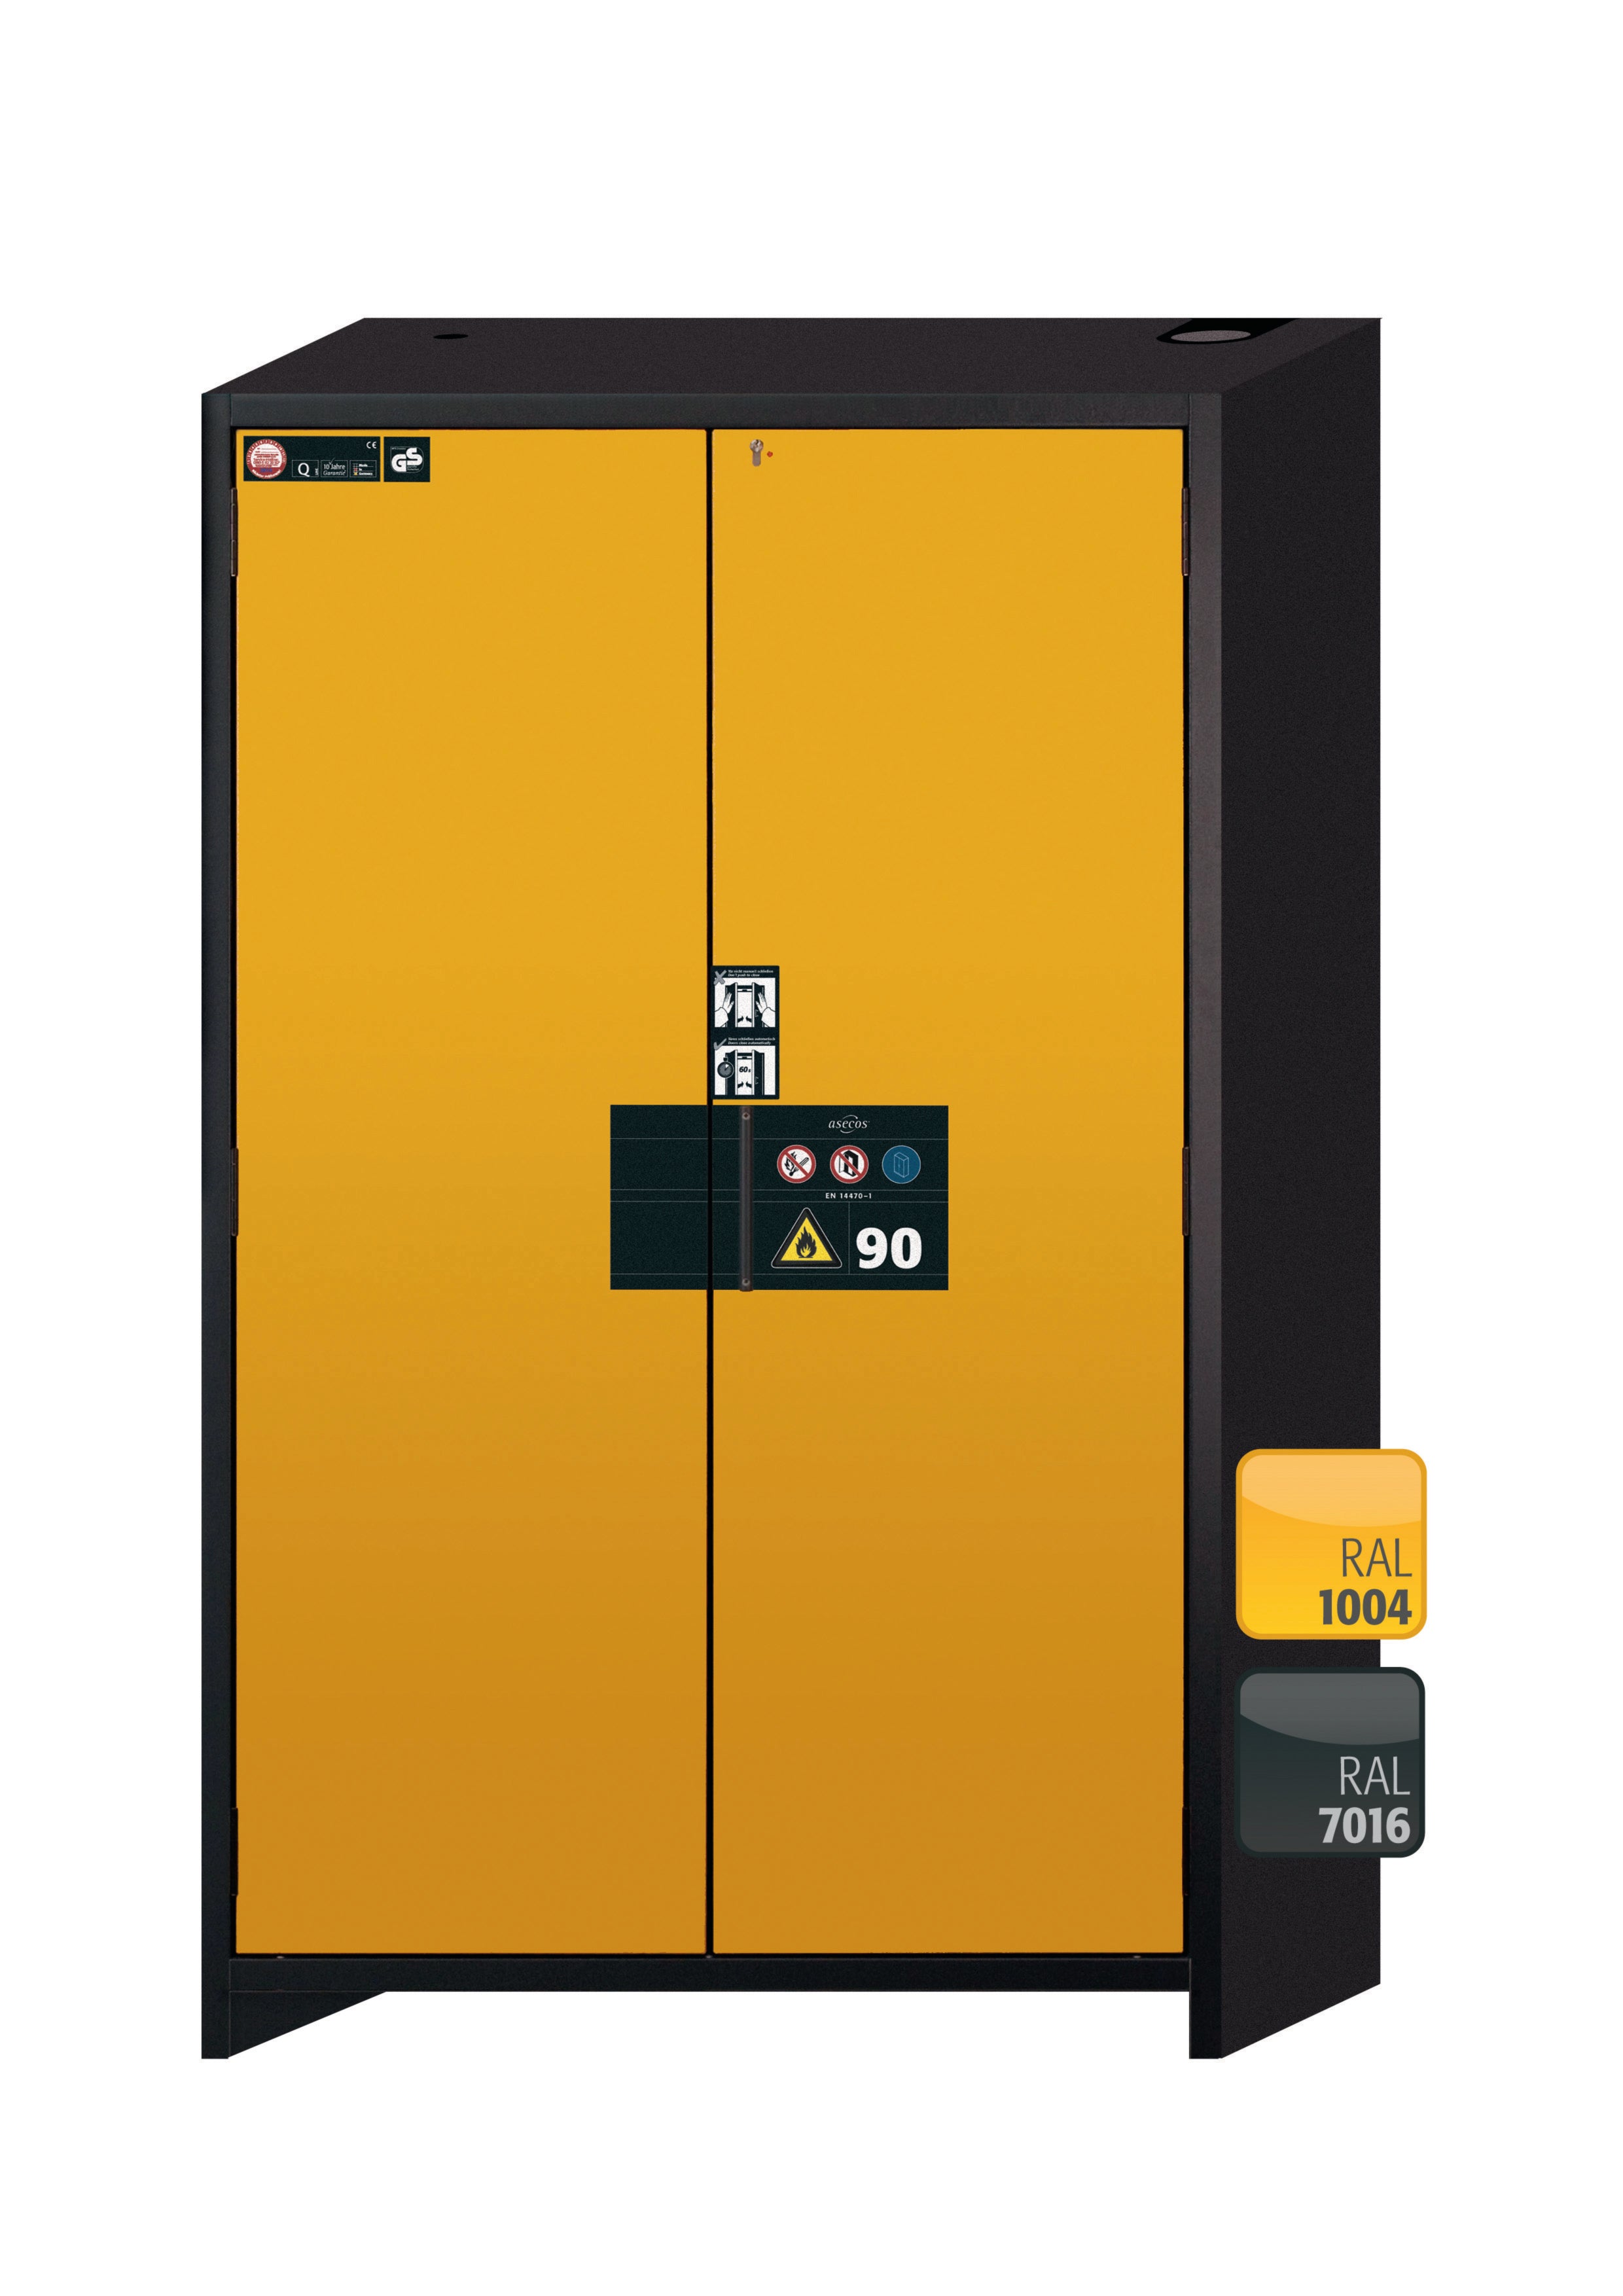 Type 90 safety storage cabinet Q-PEGASUS-90 model Q90.195.120.WDAC in warning yellow RAL 1004 with 2x shelf standard (stainless steel 1.4301),